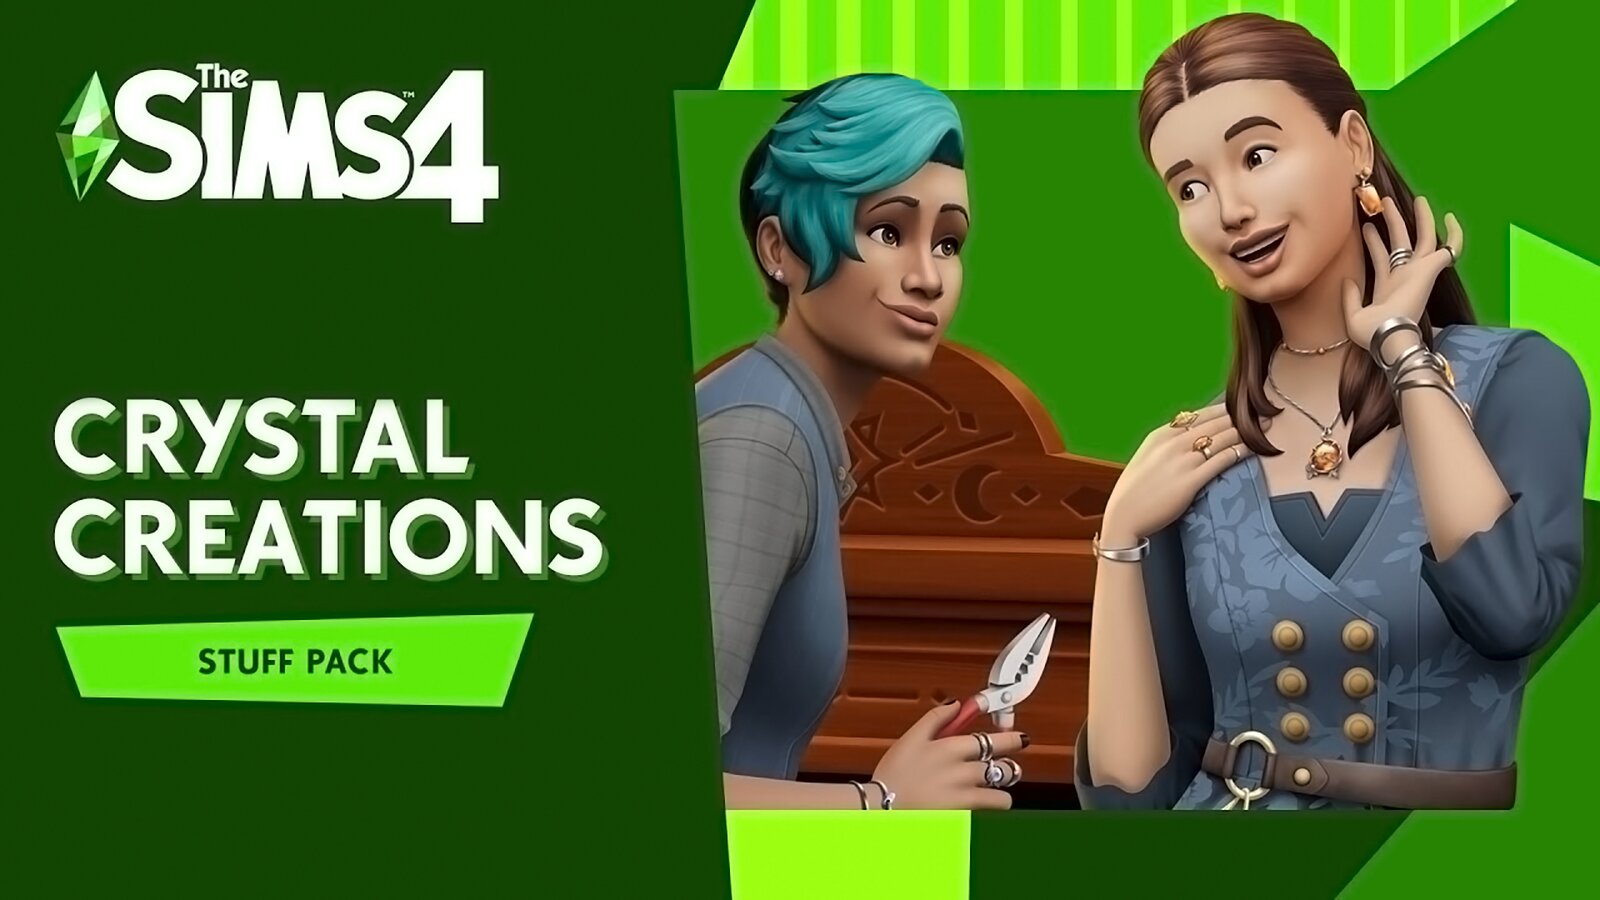 The Sims 4 - Crystal Creations Stuff Pack